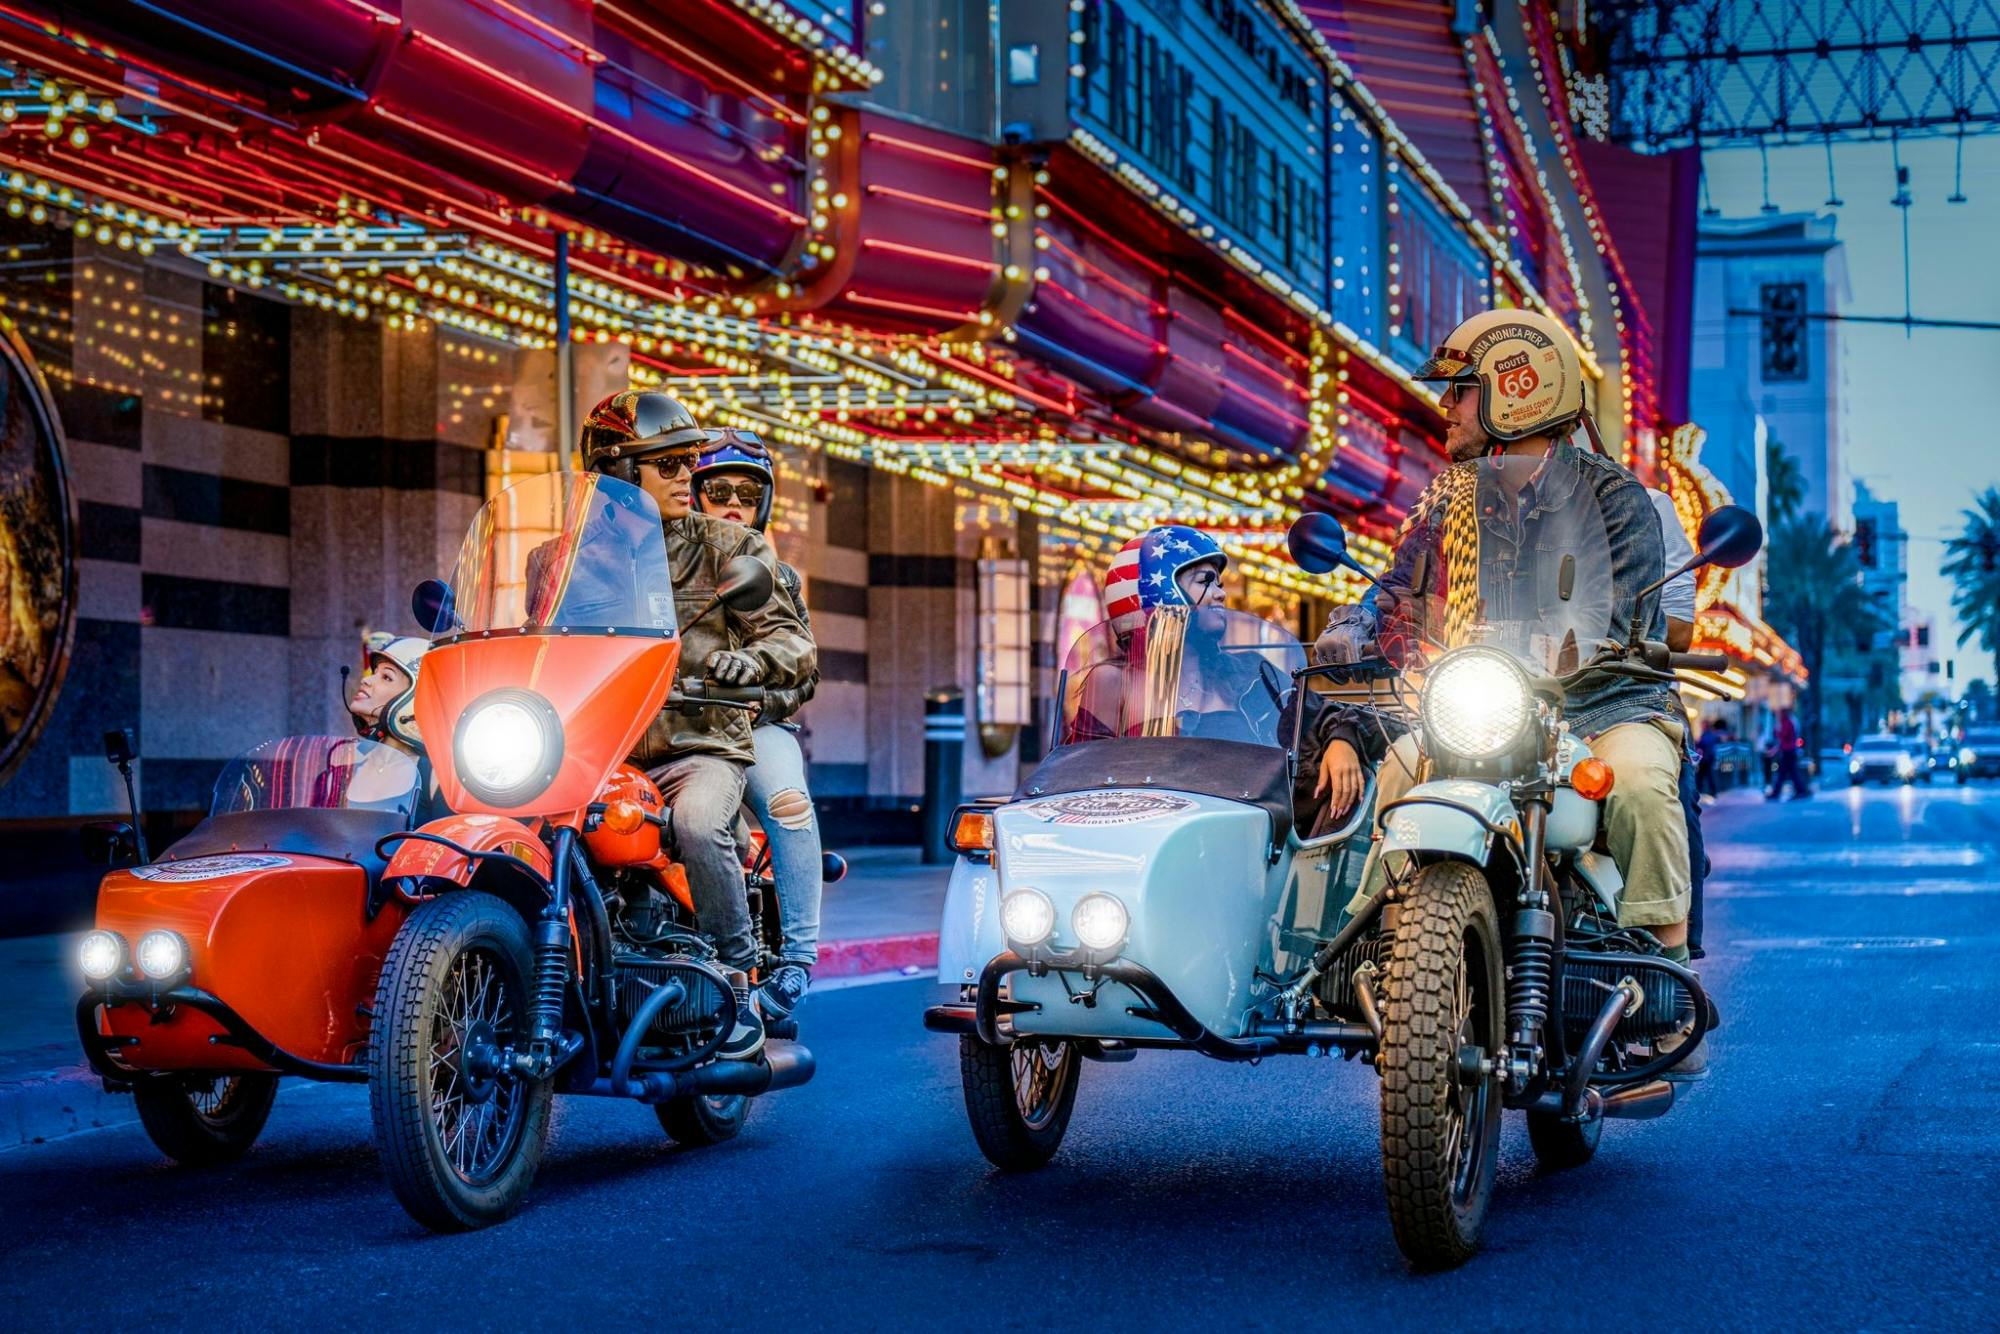 Private one hour sidecar tour of Las Vegas Strip by night Musement